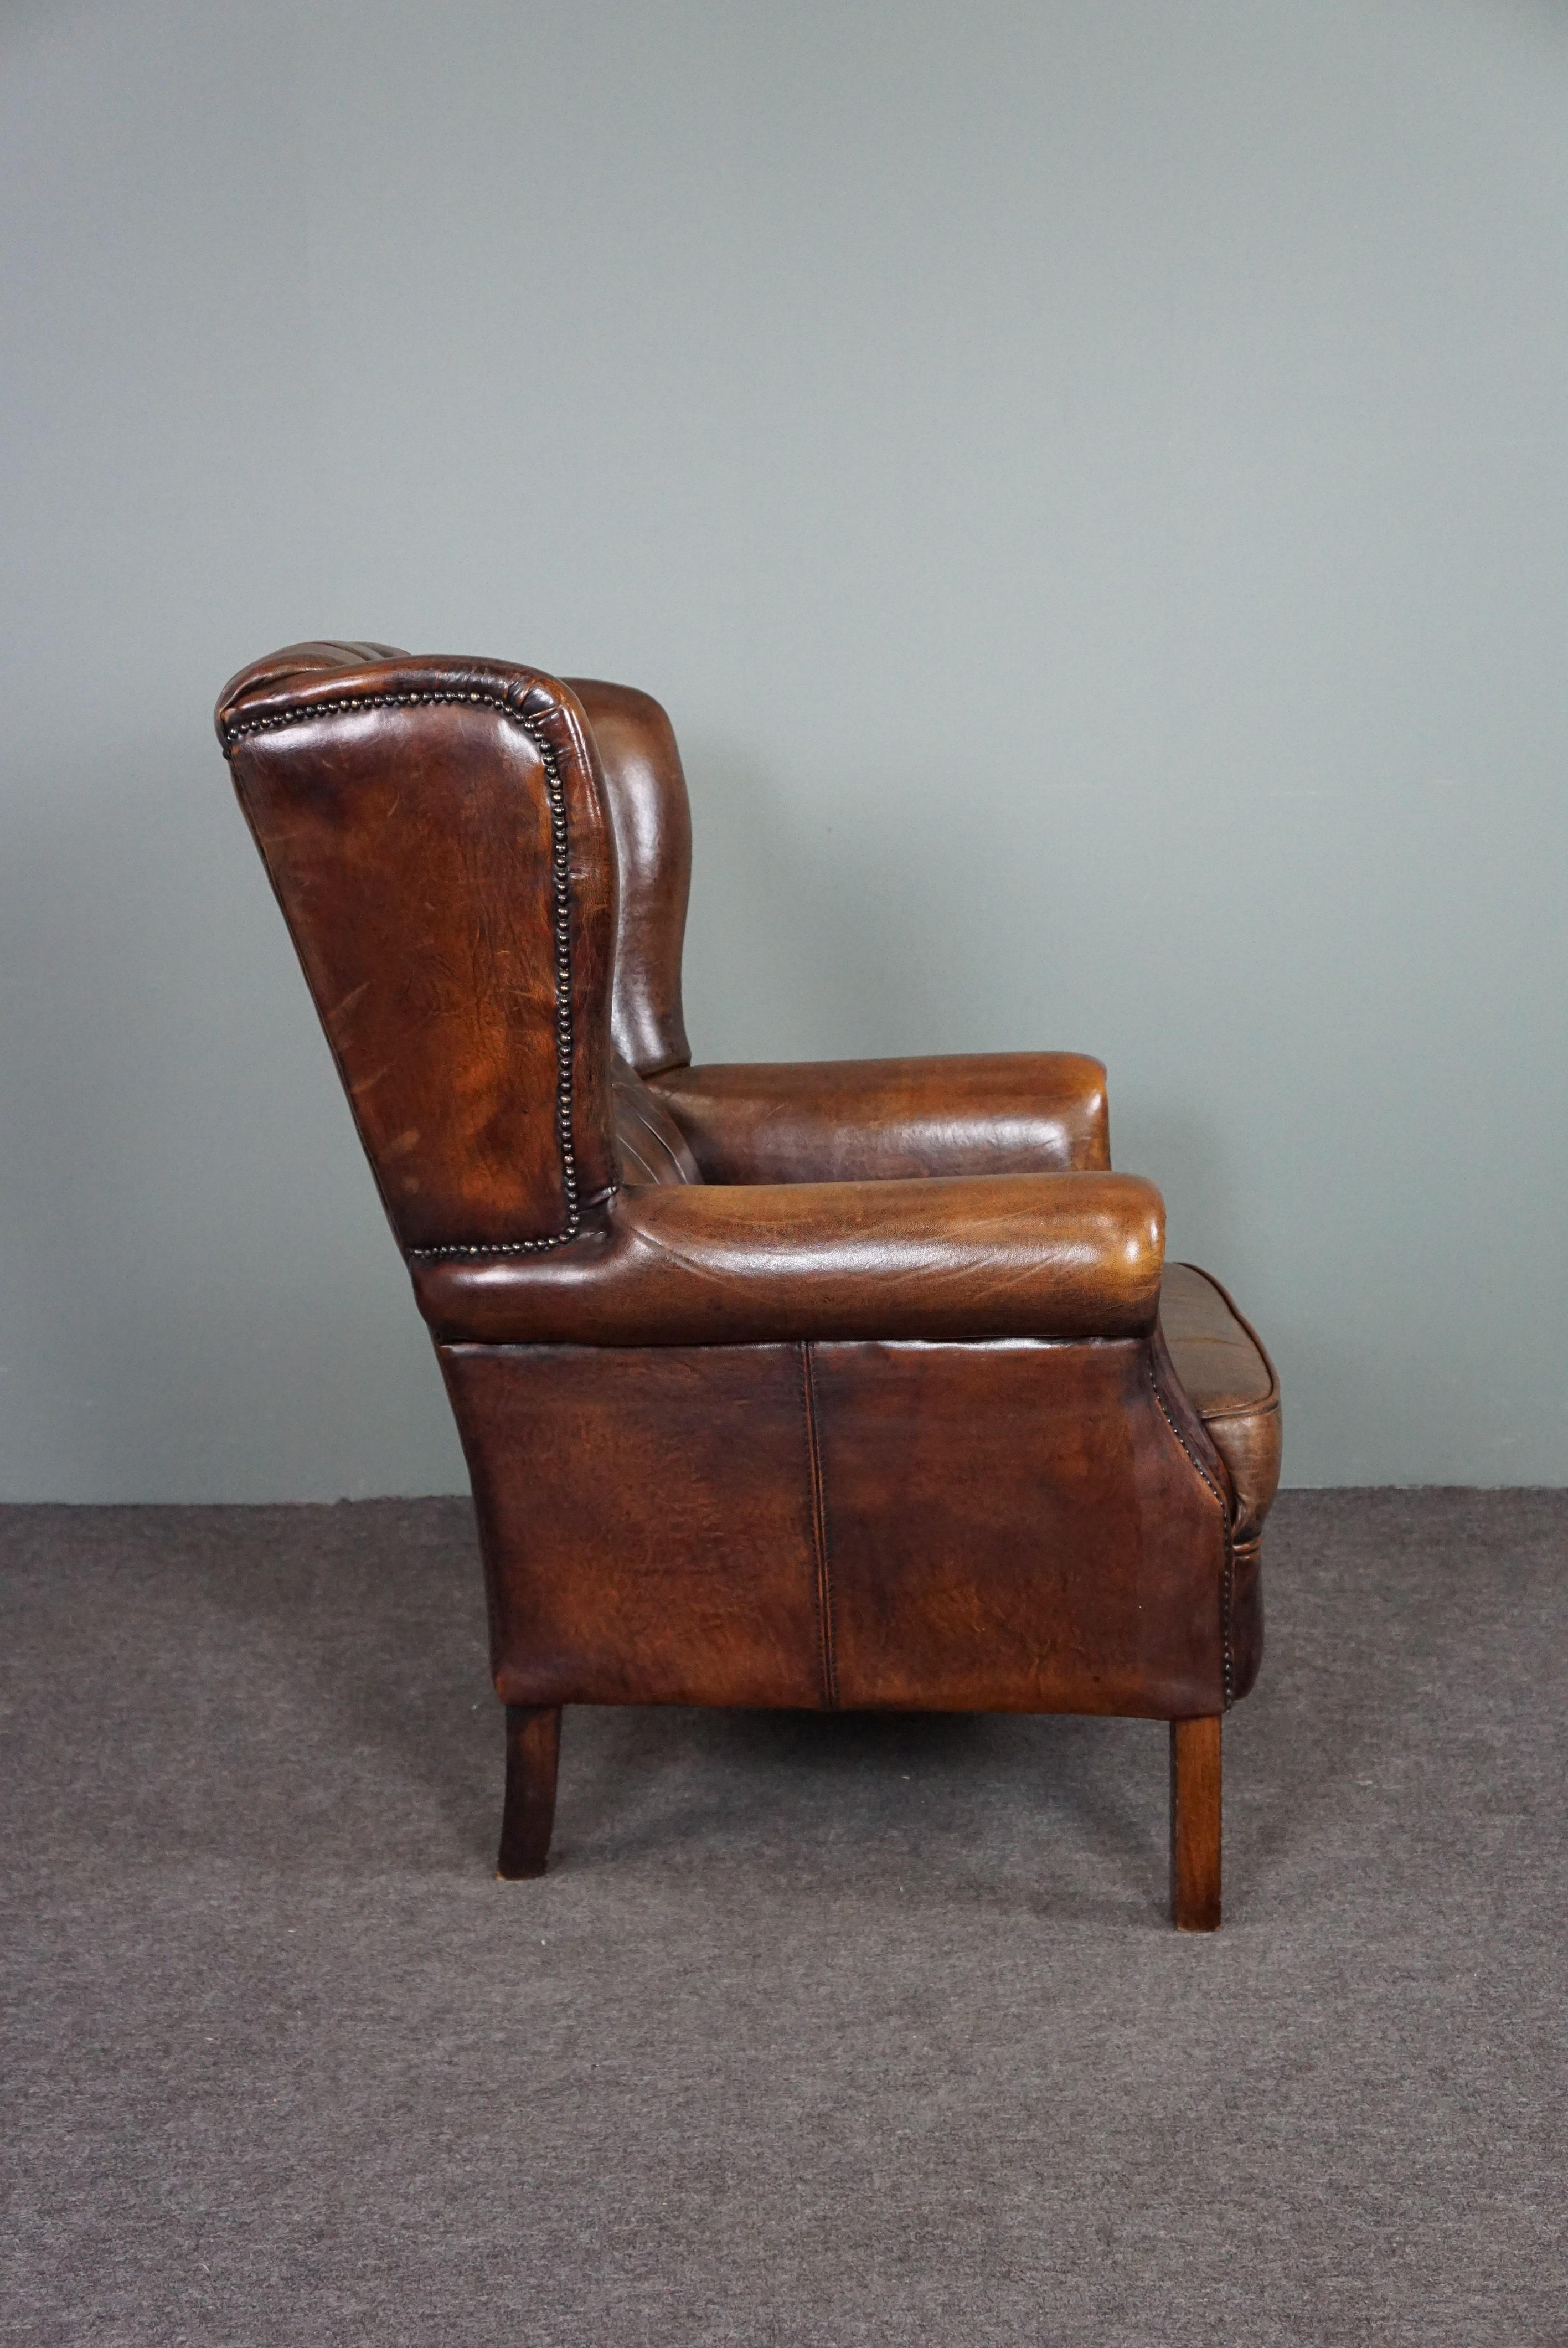 Offered is this beautiful and comfortable sheep leather wing chair with a great look and color!

This well-fitting and uncommon wing chair has beautiful colors and a padded backrest. Both the seating comfort and the condition of this armchair are